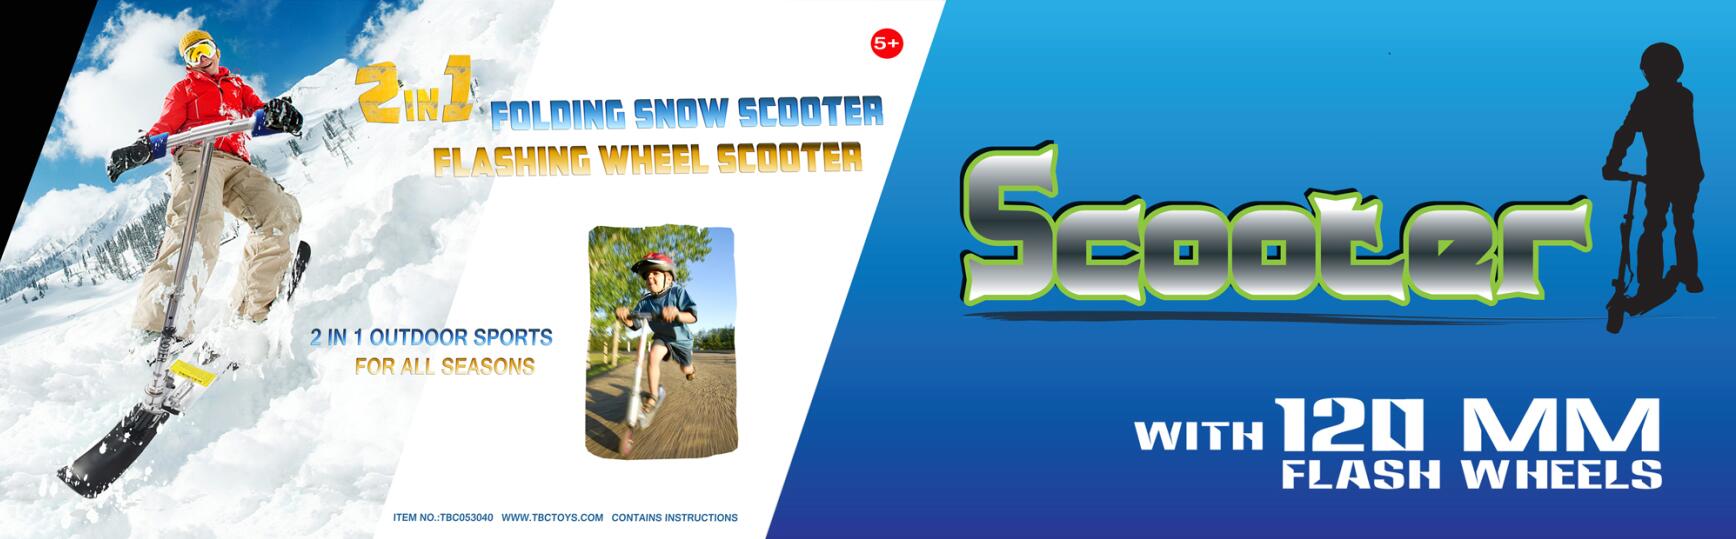 Snow scooter winter